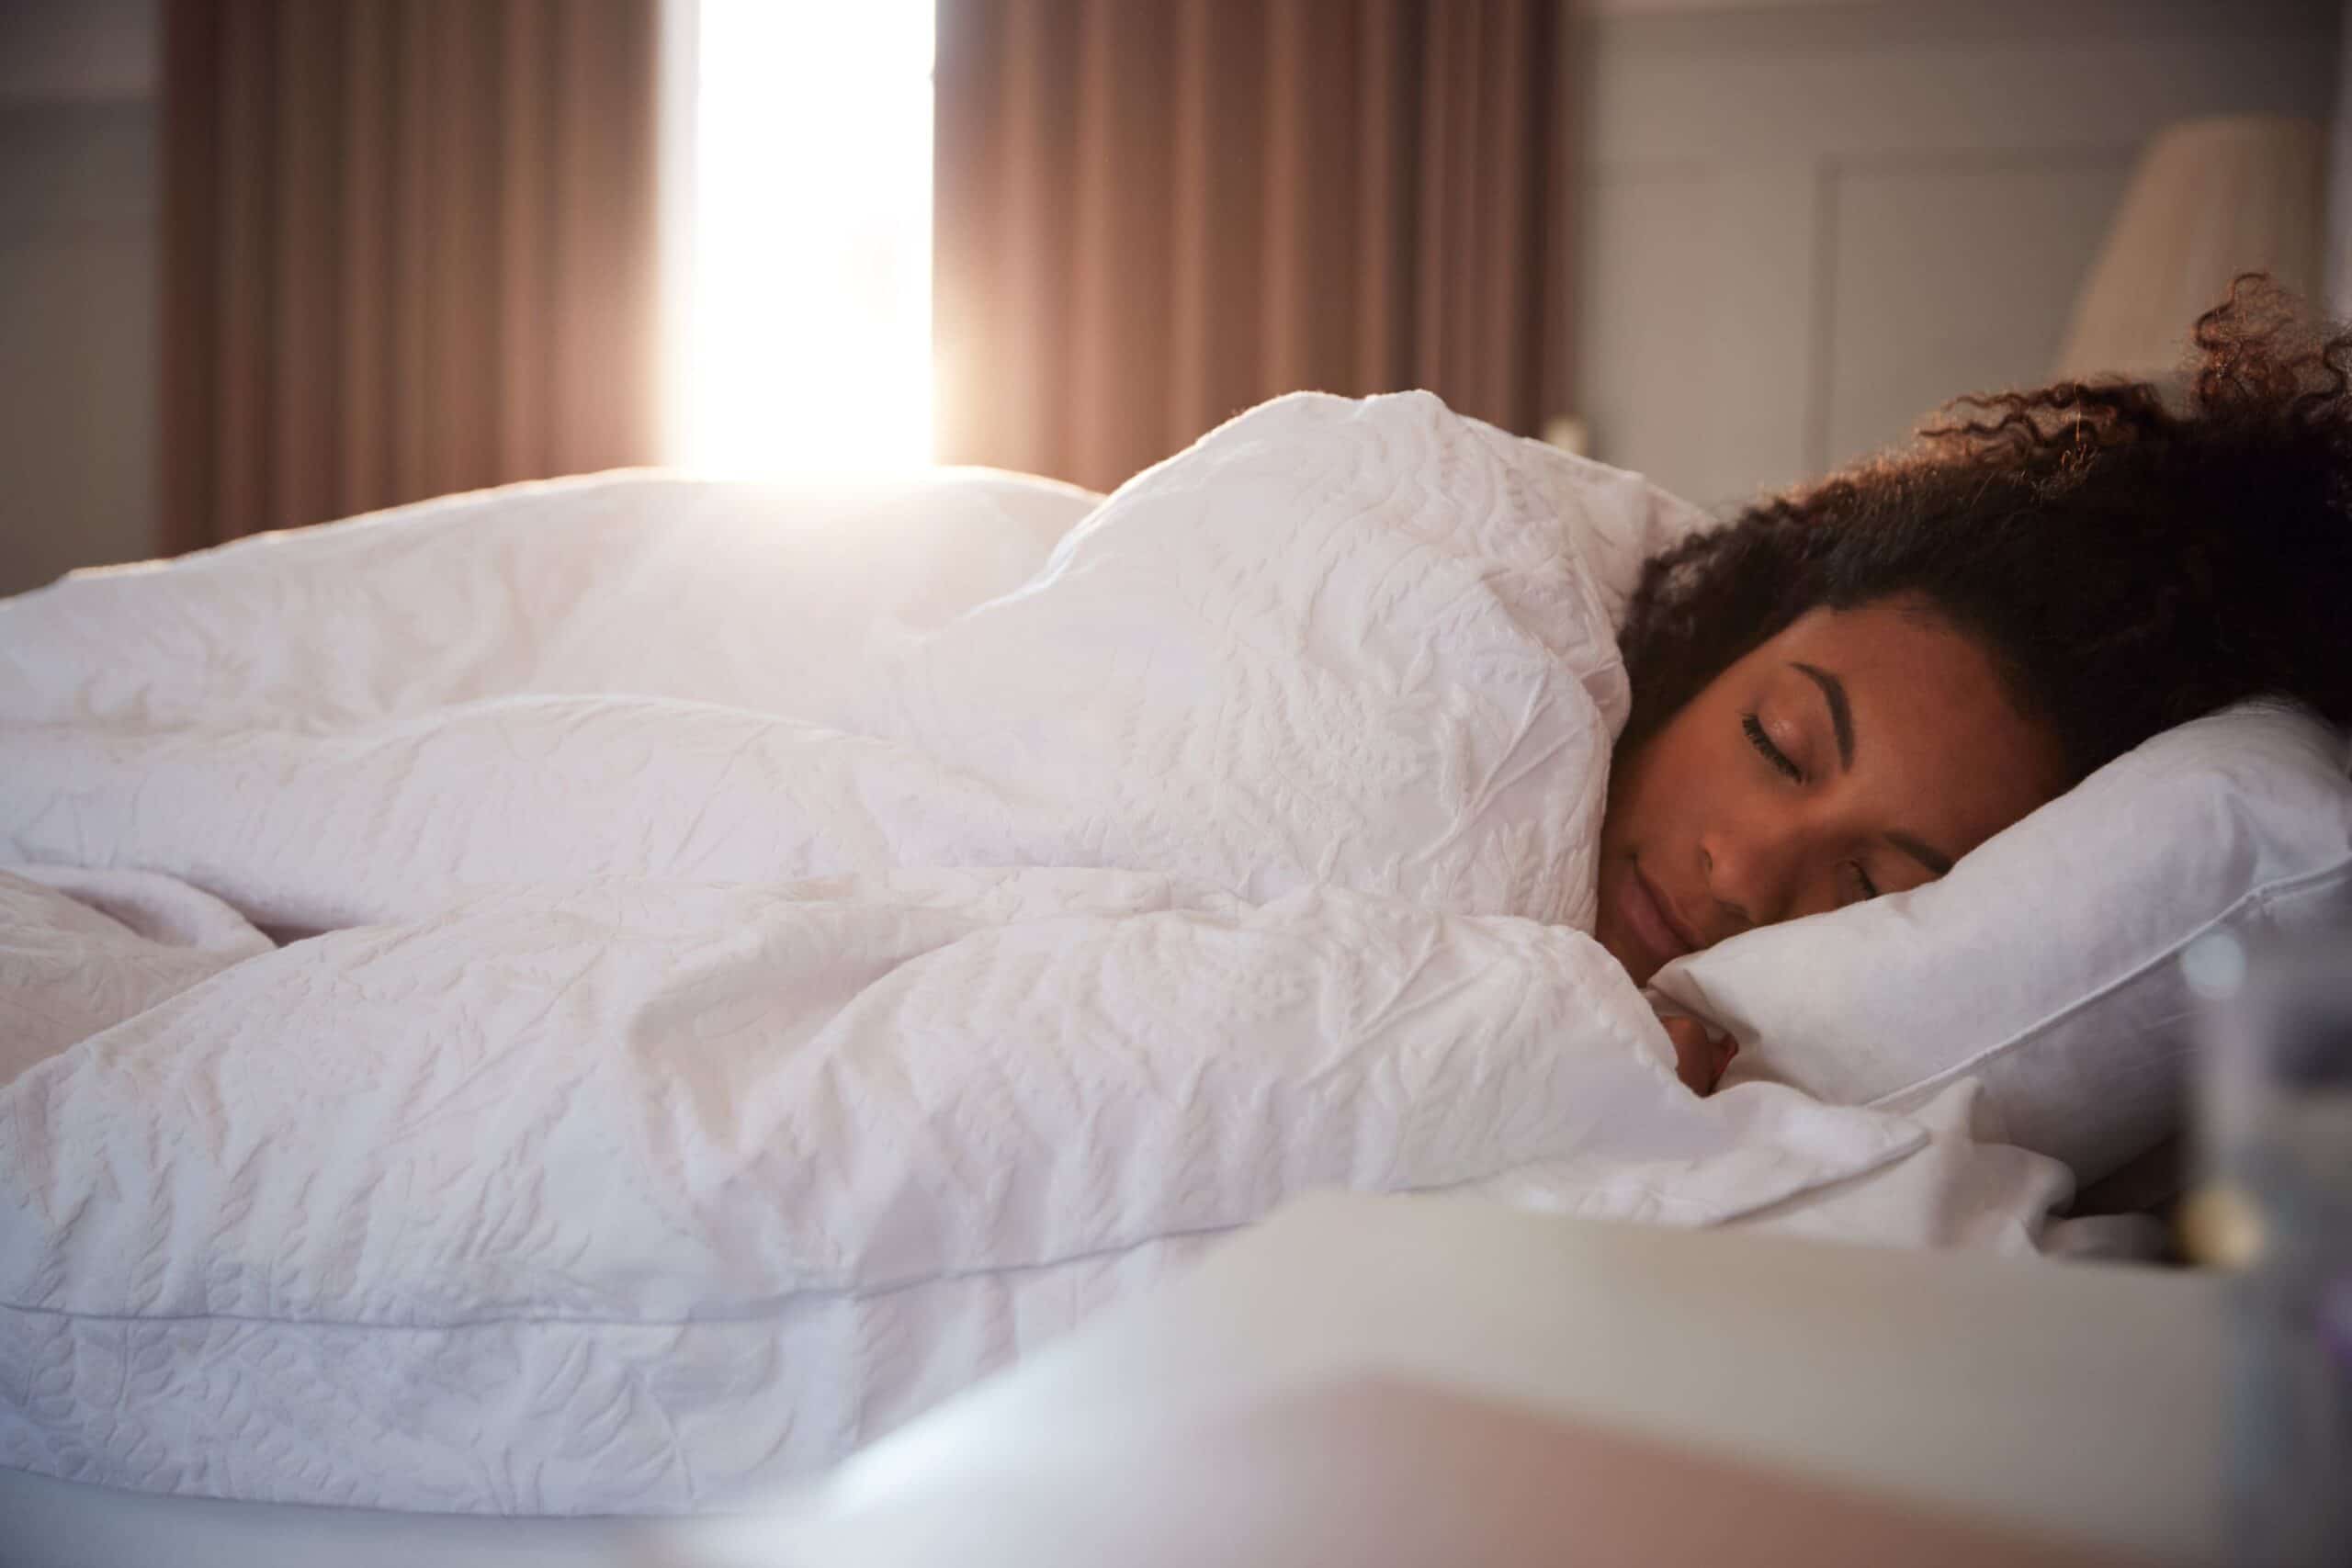 Weighted Blankets Could Help Ease Insomnia